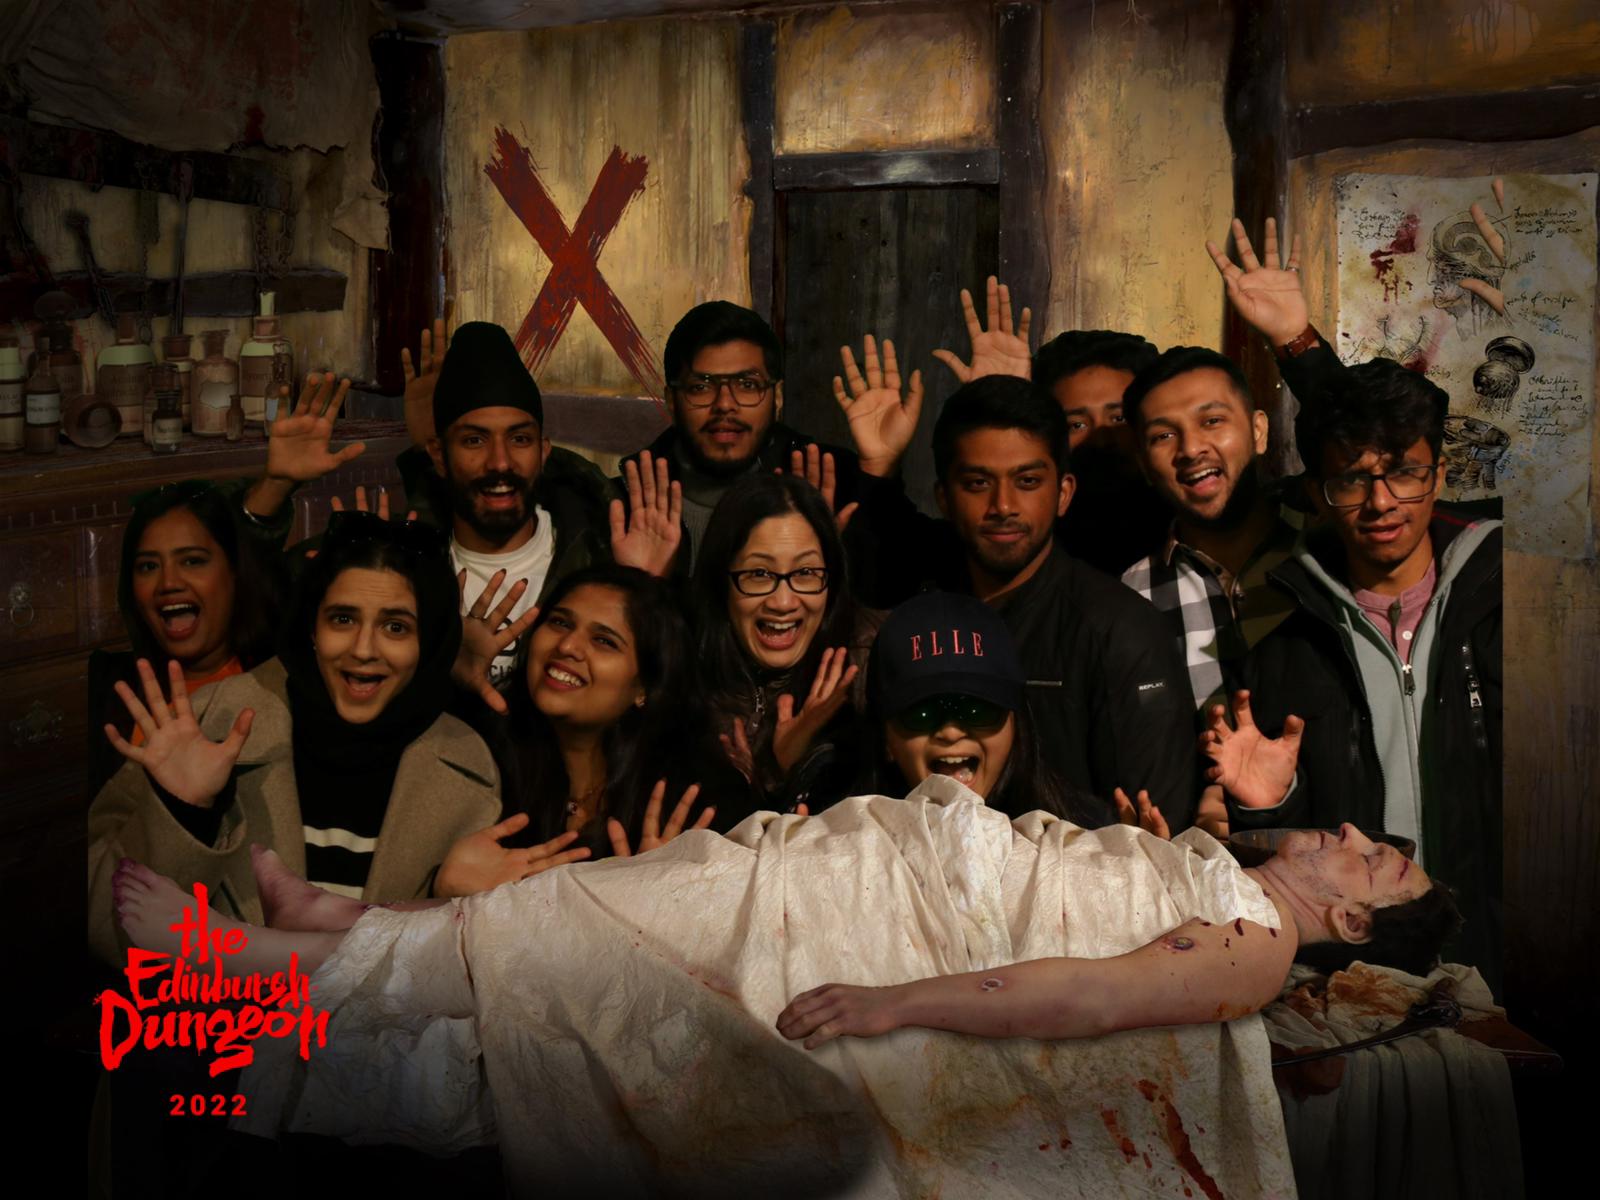 The Edinburgh Dungeon staff and students with mummy prop. Gruesome, horror. Souvernir photo with Edinburgh Dungeon logo.